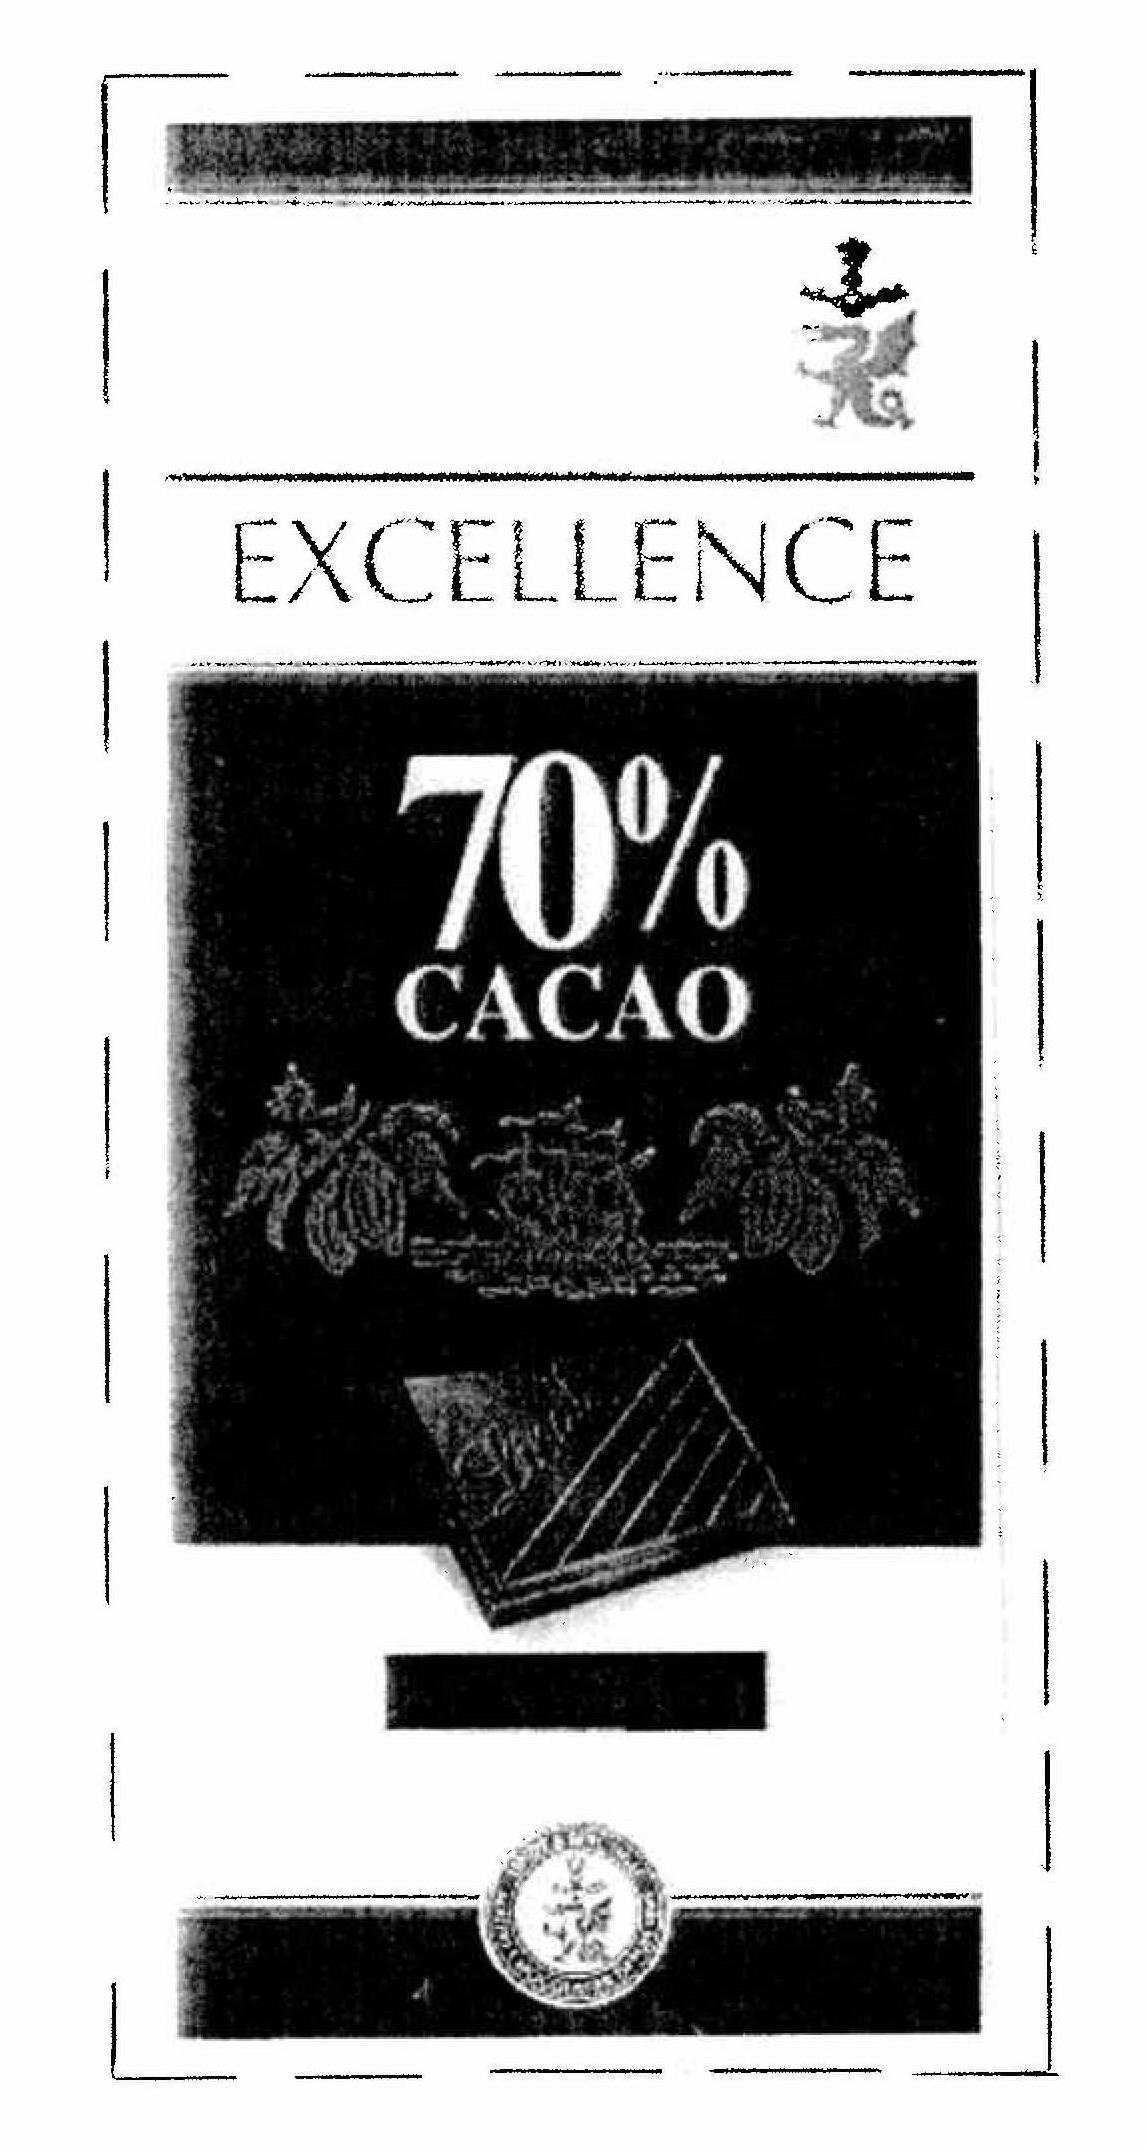  EXCELLENCE 70% CACAO